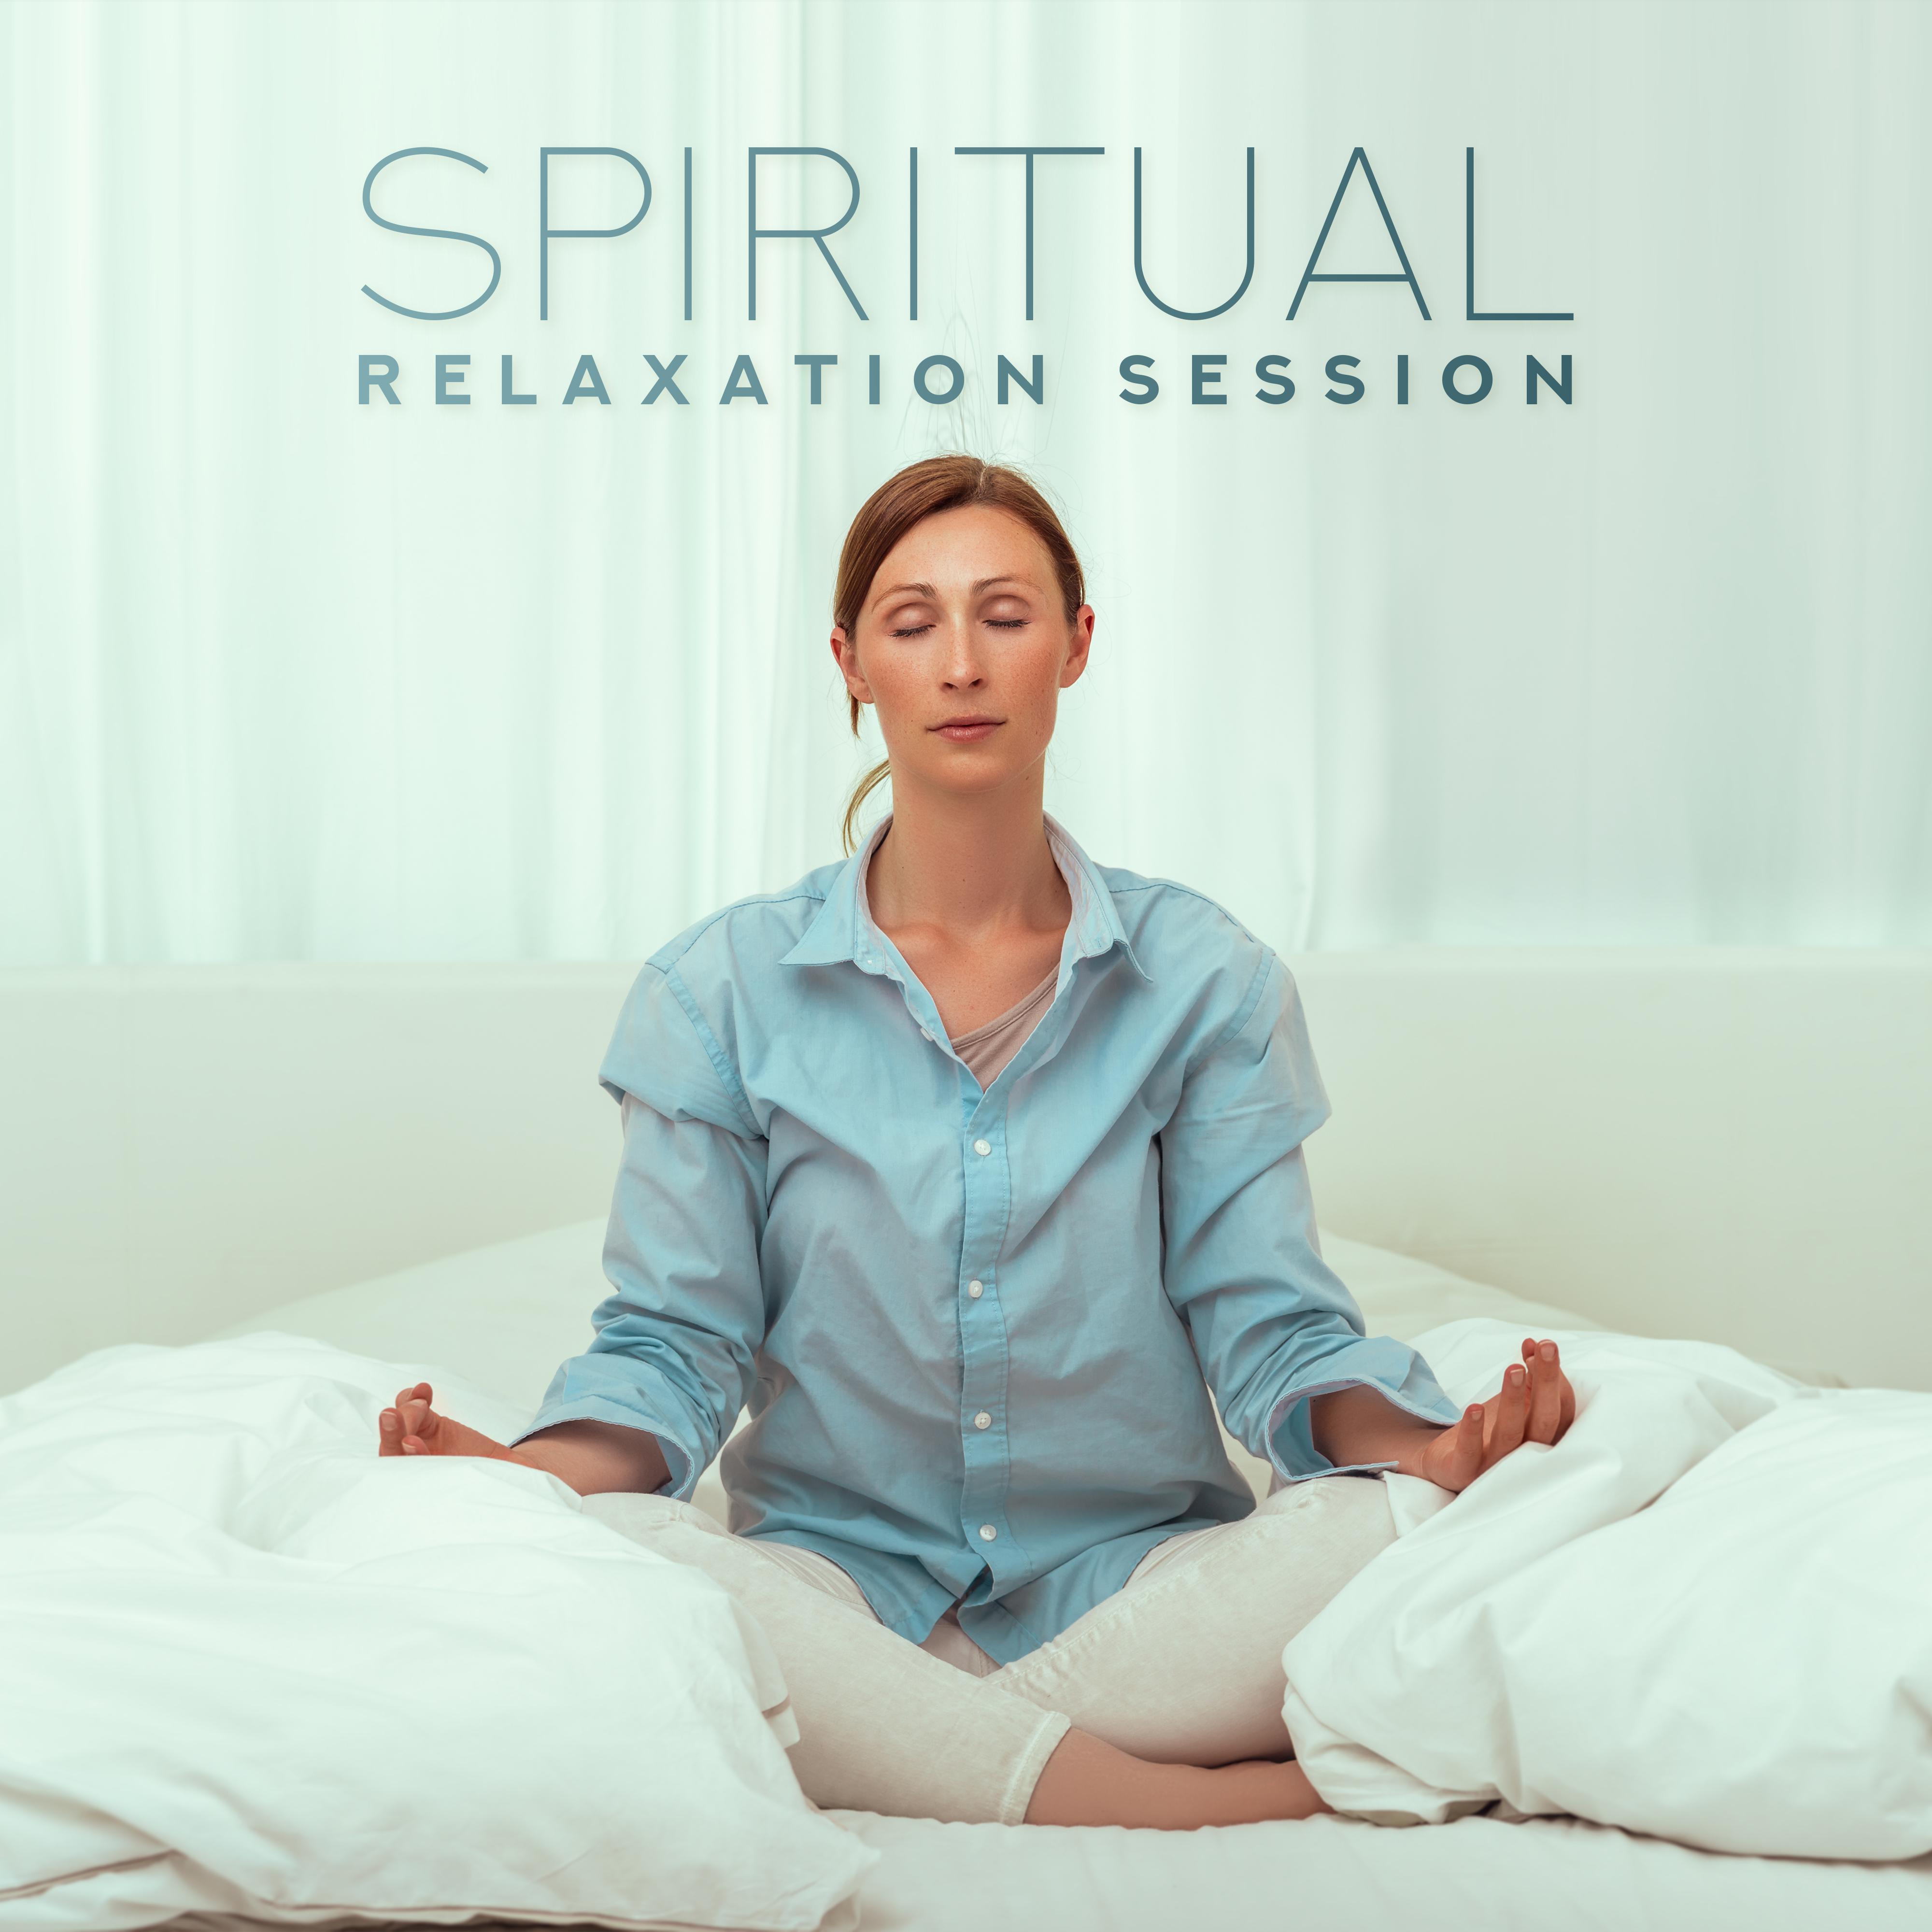 Spiritual Relaxation Session - The Greatest Musical Compositions for Meditation, Yoga, Spa and Relaxation